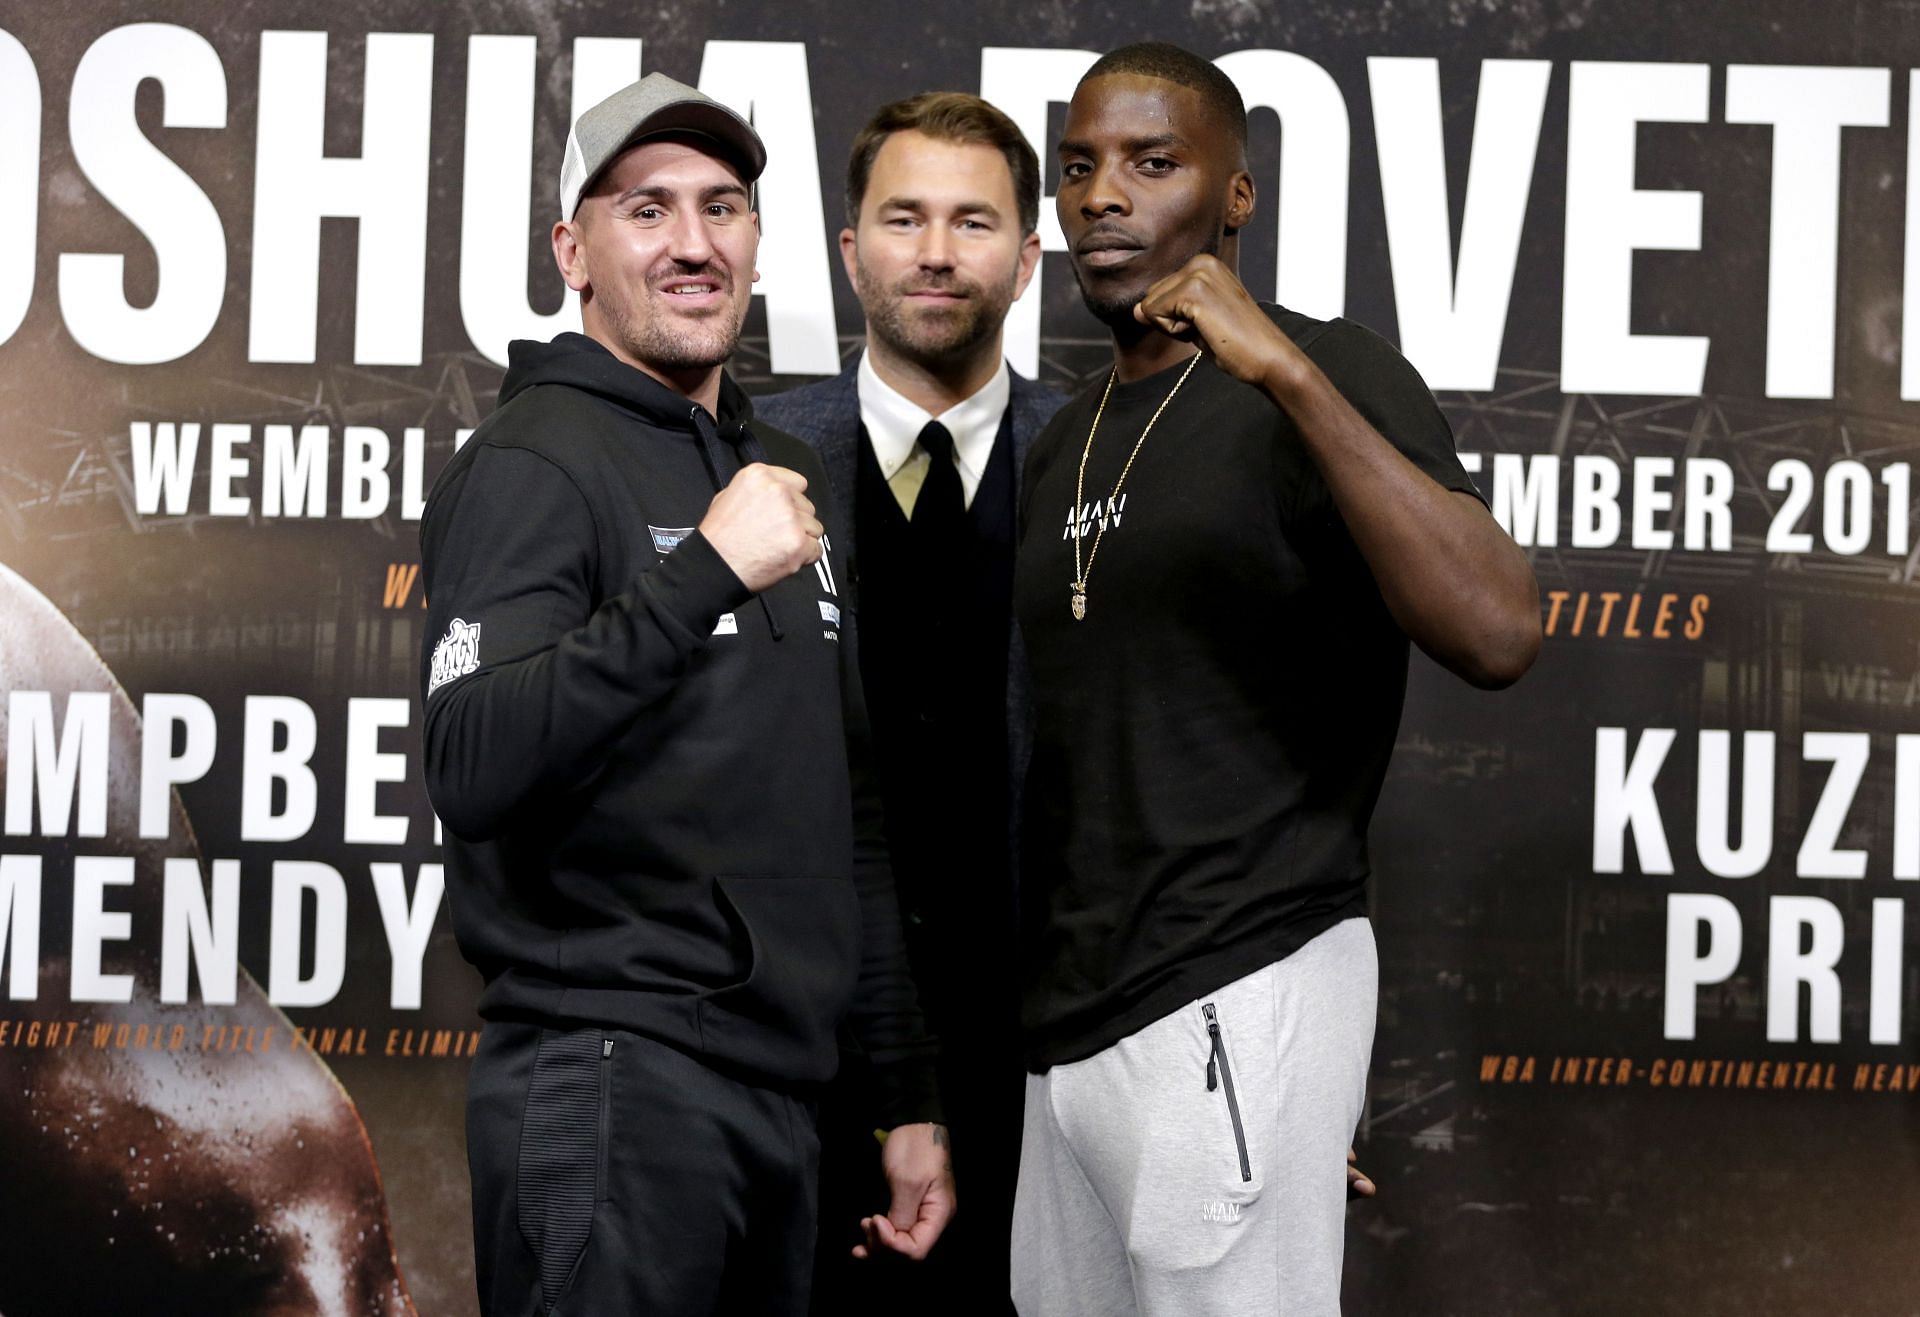 Eddie Hearn (center) and Lawrence Okolie (right) at Anthony Joshua vs. Alexander Povetkin Press Conference